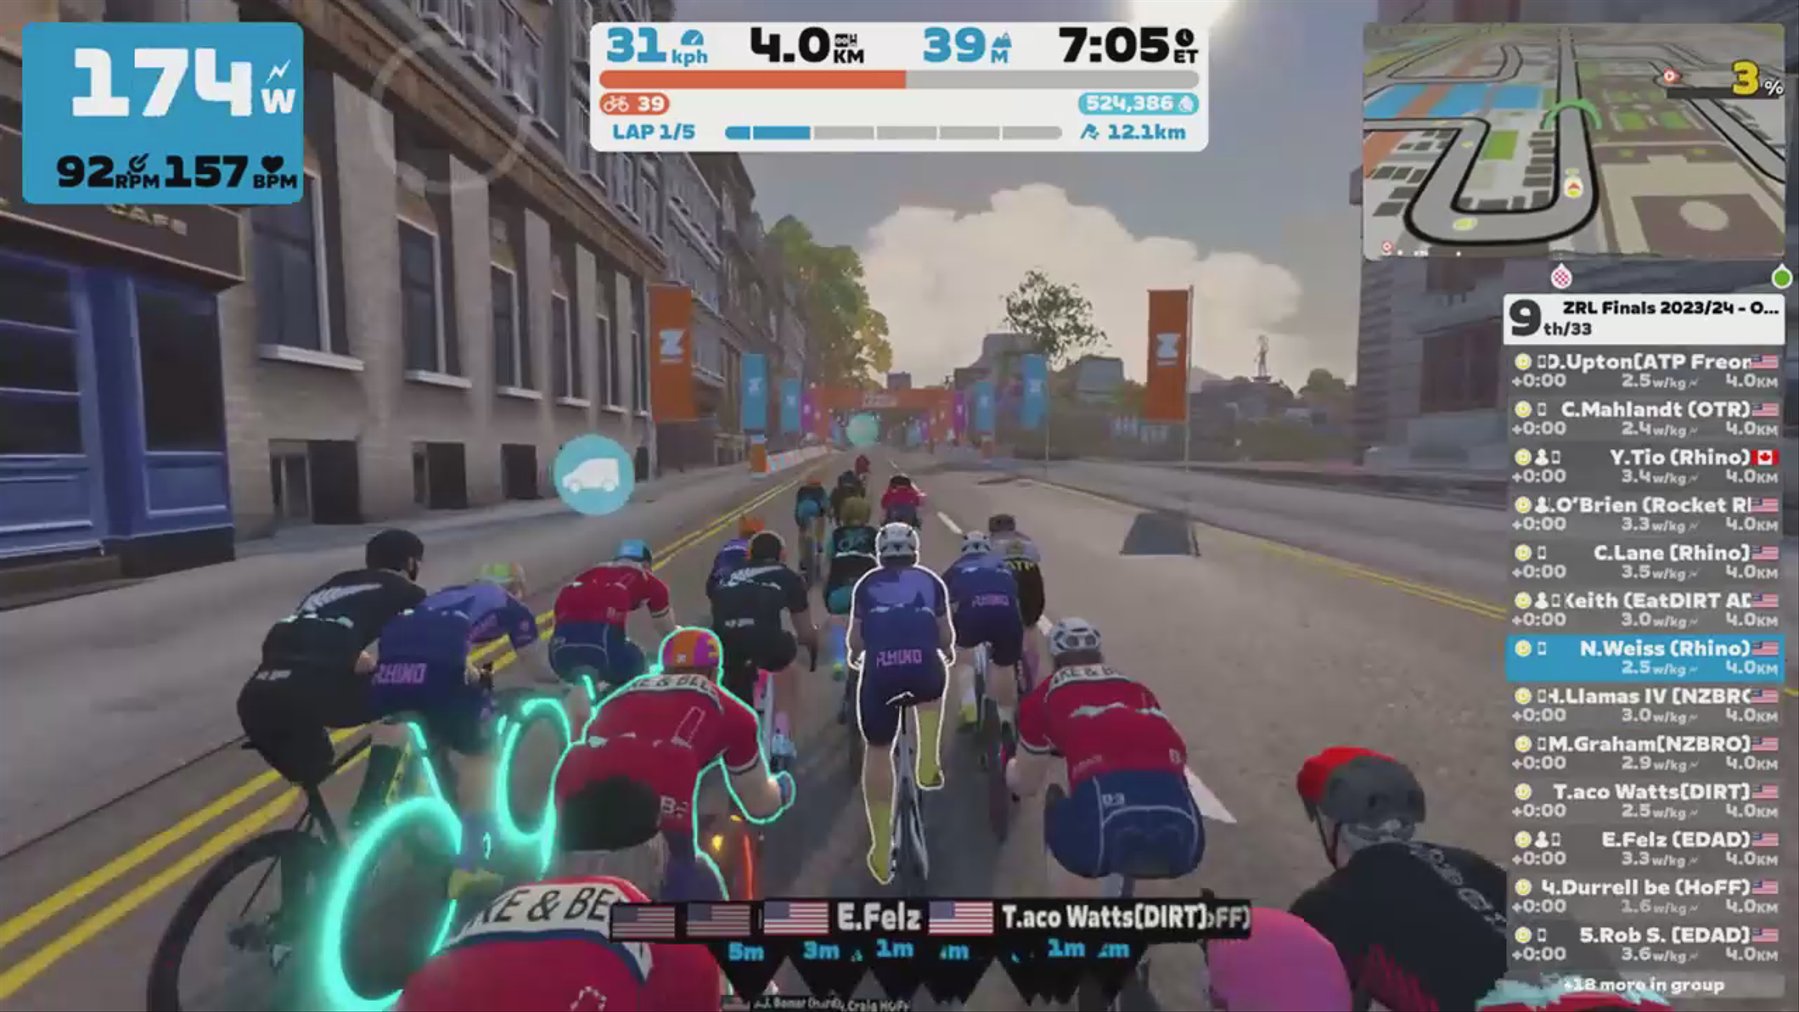 Zwift - Race: ZRL Finals 2023/24 - Open AMERICA Division 1 - Cup Final (Part2) (D) on Glasgow Reverse in Scotland